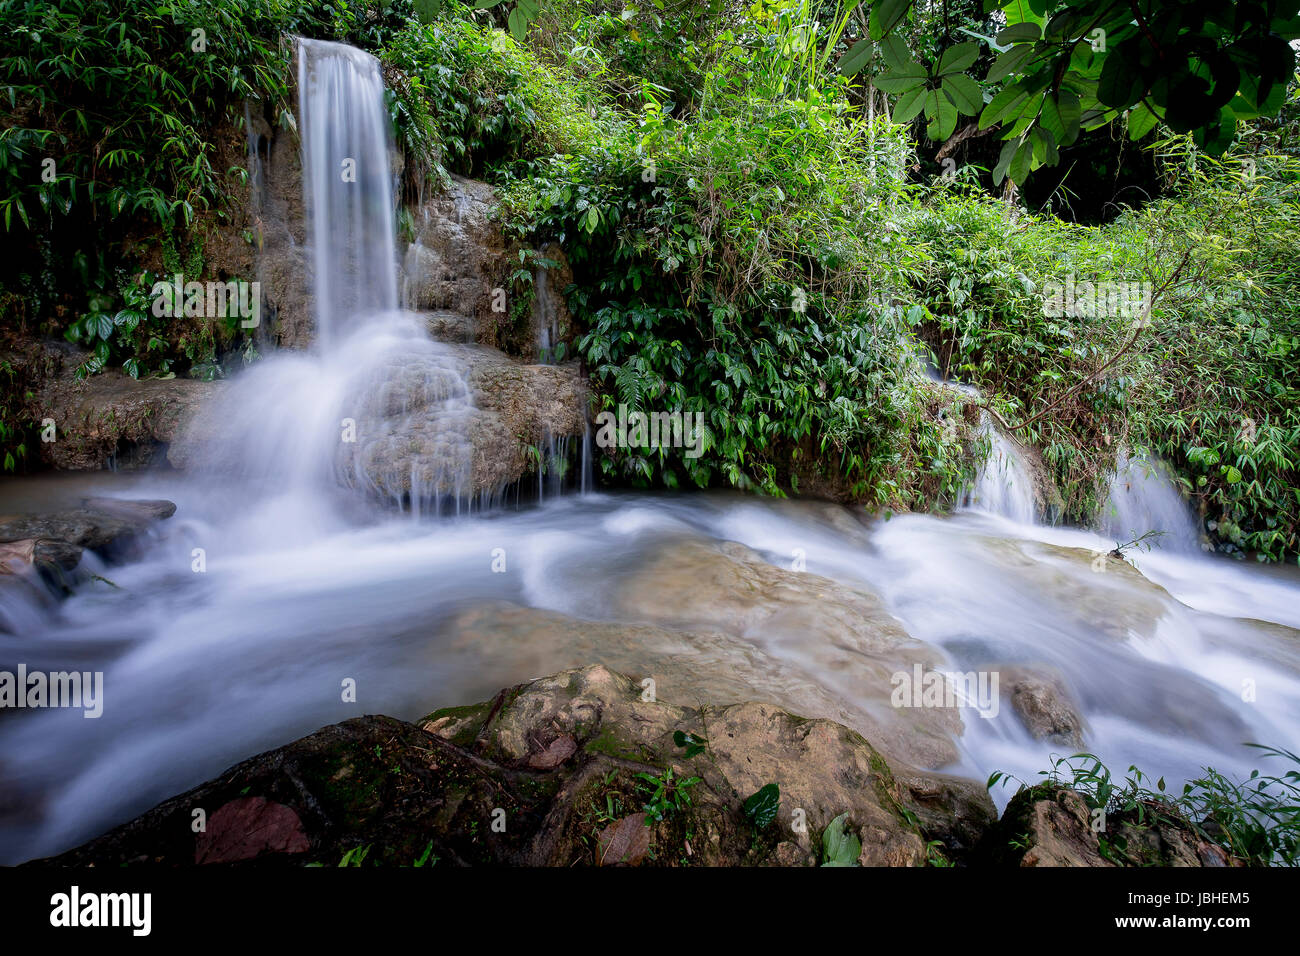 Long exposure shot of Hieu waterfall in Thanh Hoa province of Viet Nam Stock Photo